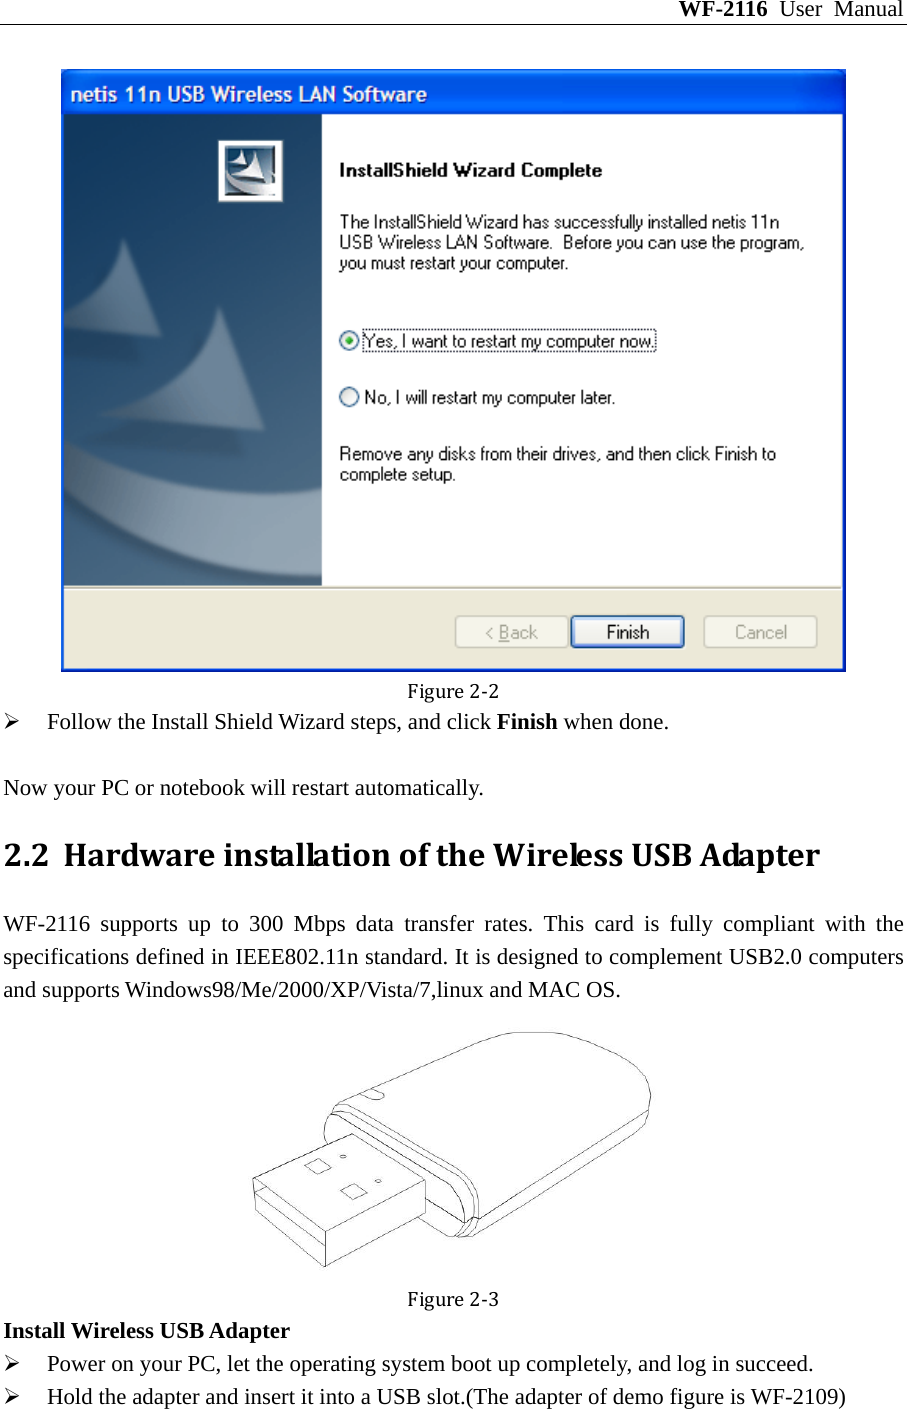 WF-2116 User Manual Figure2‐2 ¾ Follow the Install Shield Wizard steps, and click Finish when done.  Now your PC or notebook will restart automatically. 2.2 HardwareinstallationoftheWirelessUSBAdapterWF-2116 supports up to 300 Mbps data transfer rates. This card is fully compliant with the specifications defined in IEEE802.11n standard. It is designed to complement USB2.0 computers and supports Windows98/Me/2000/XP/Vista/7,linux and MAC OS. Figure2‐3Install Wireless USB Adapter ¾ Power on your PC, let the operating system boot up completely, and log in succeed. ¾ Hold the adapter and insert it into a USB slot.(The adapter of demo figure is WF-2109) 